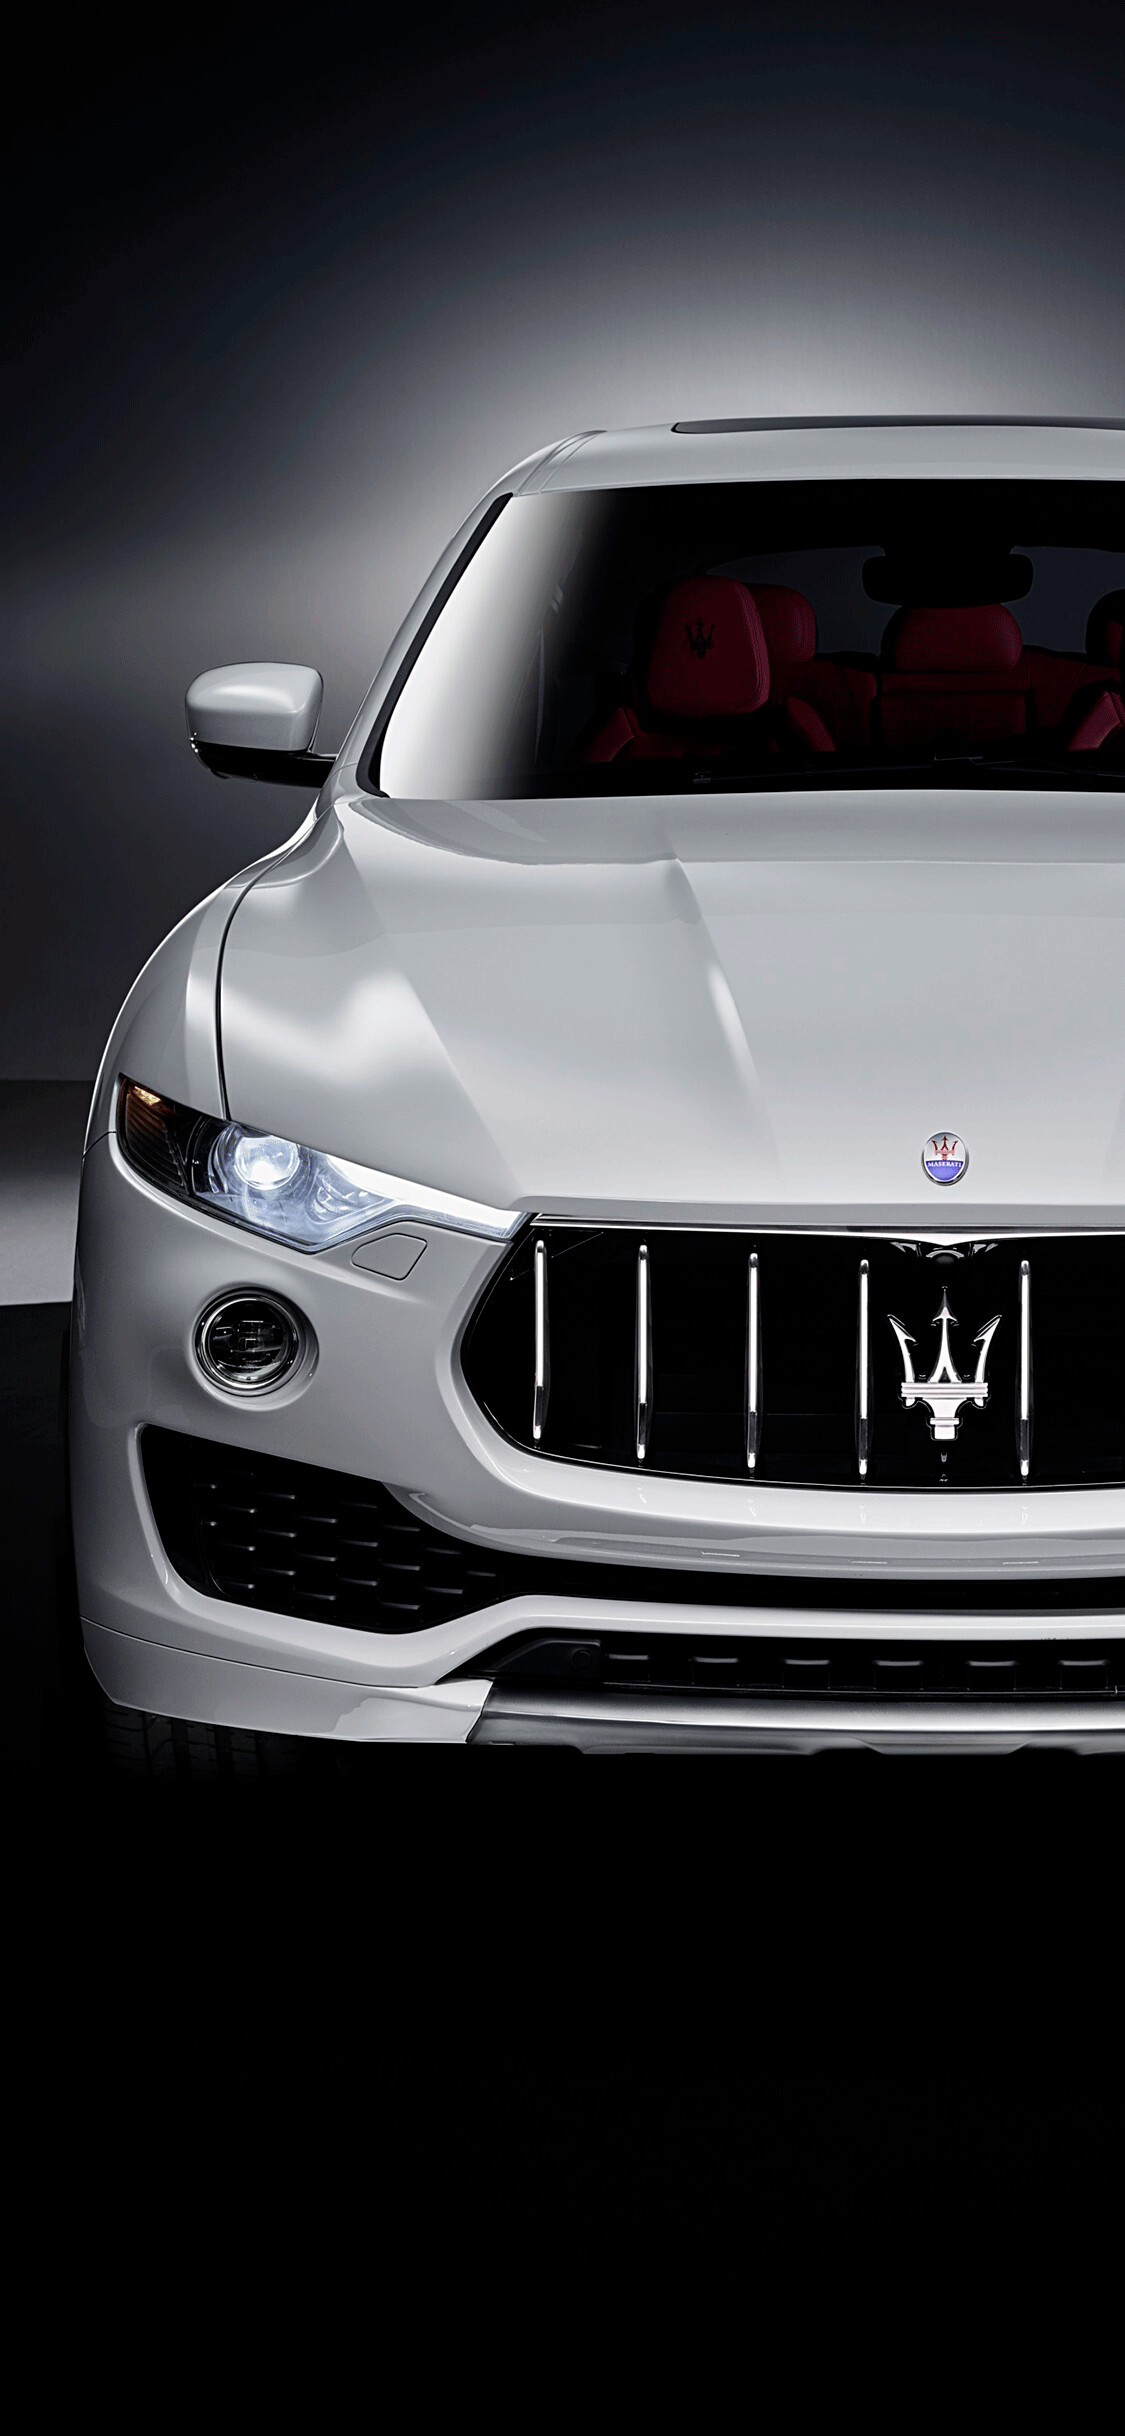 Maserati: The maker of expensive, luxurious, and stylish vehicles, Italy. 1130x2440 HD Wallpaper.